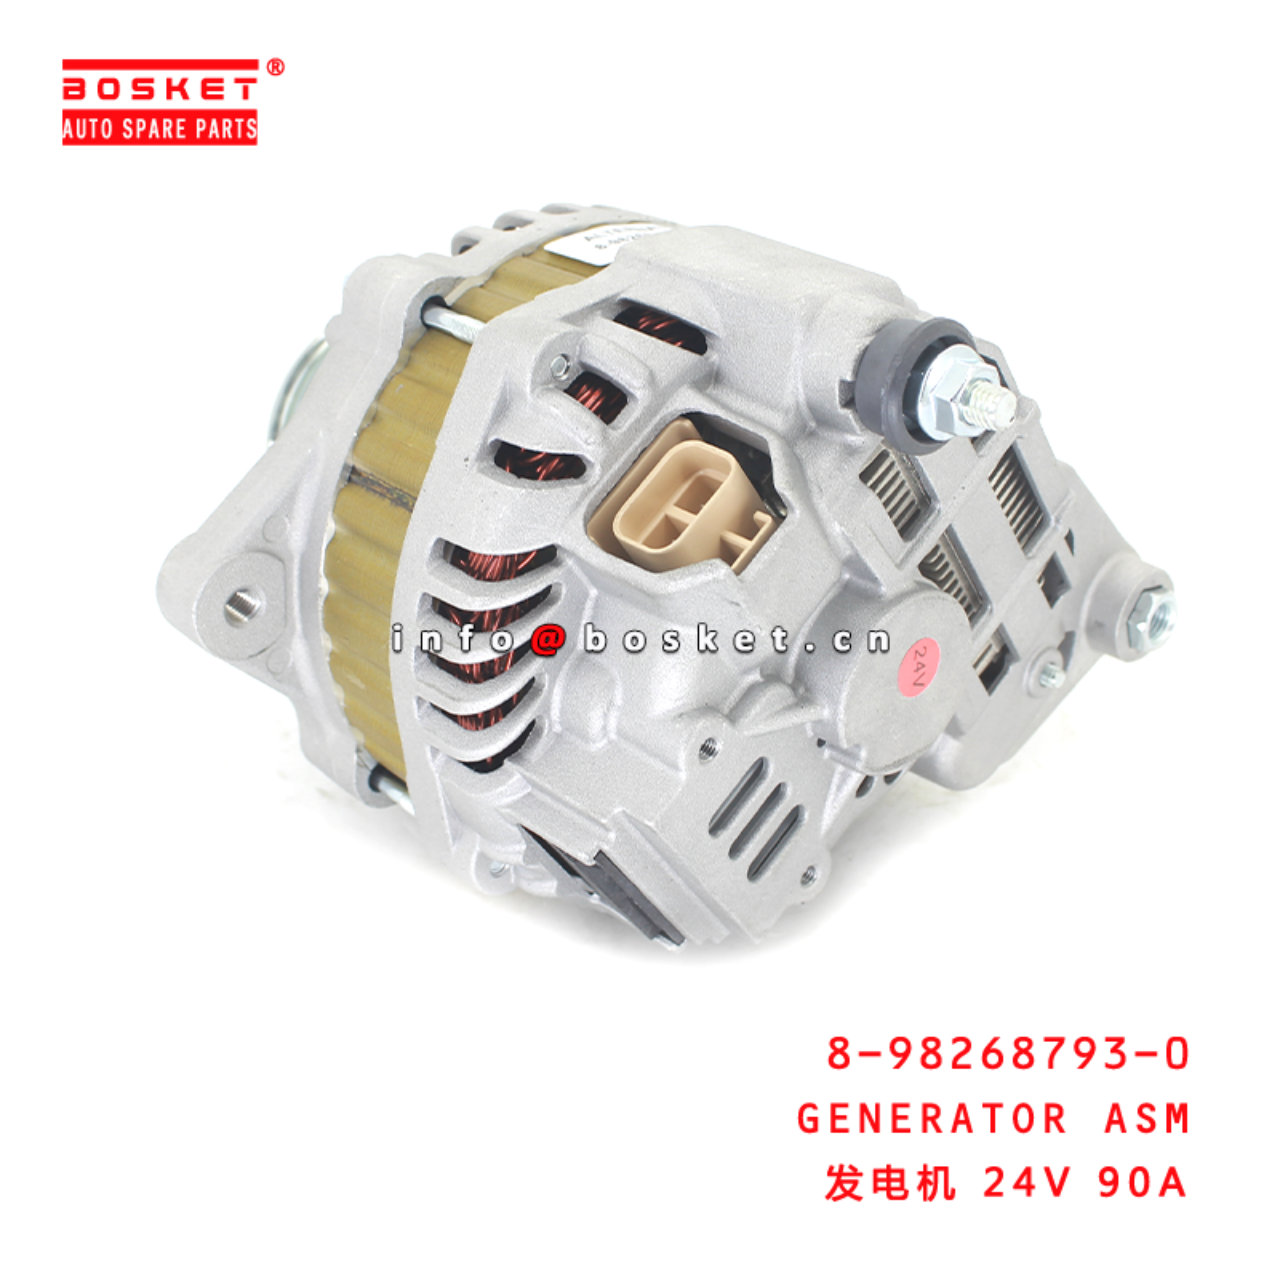 8-98268793-0 Generator Assembly suitable for ISUZU 4HK1 8982687930 